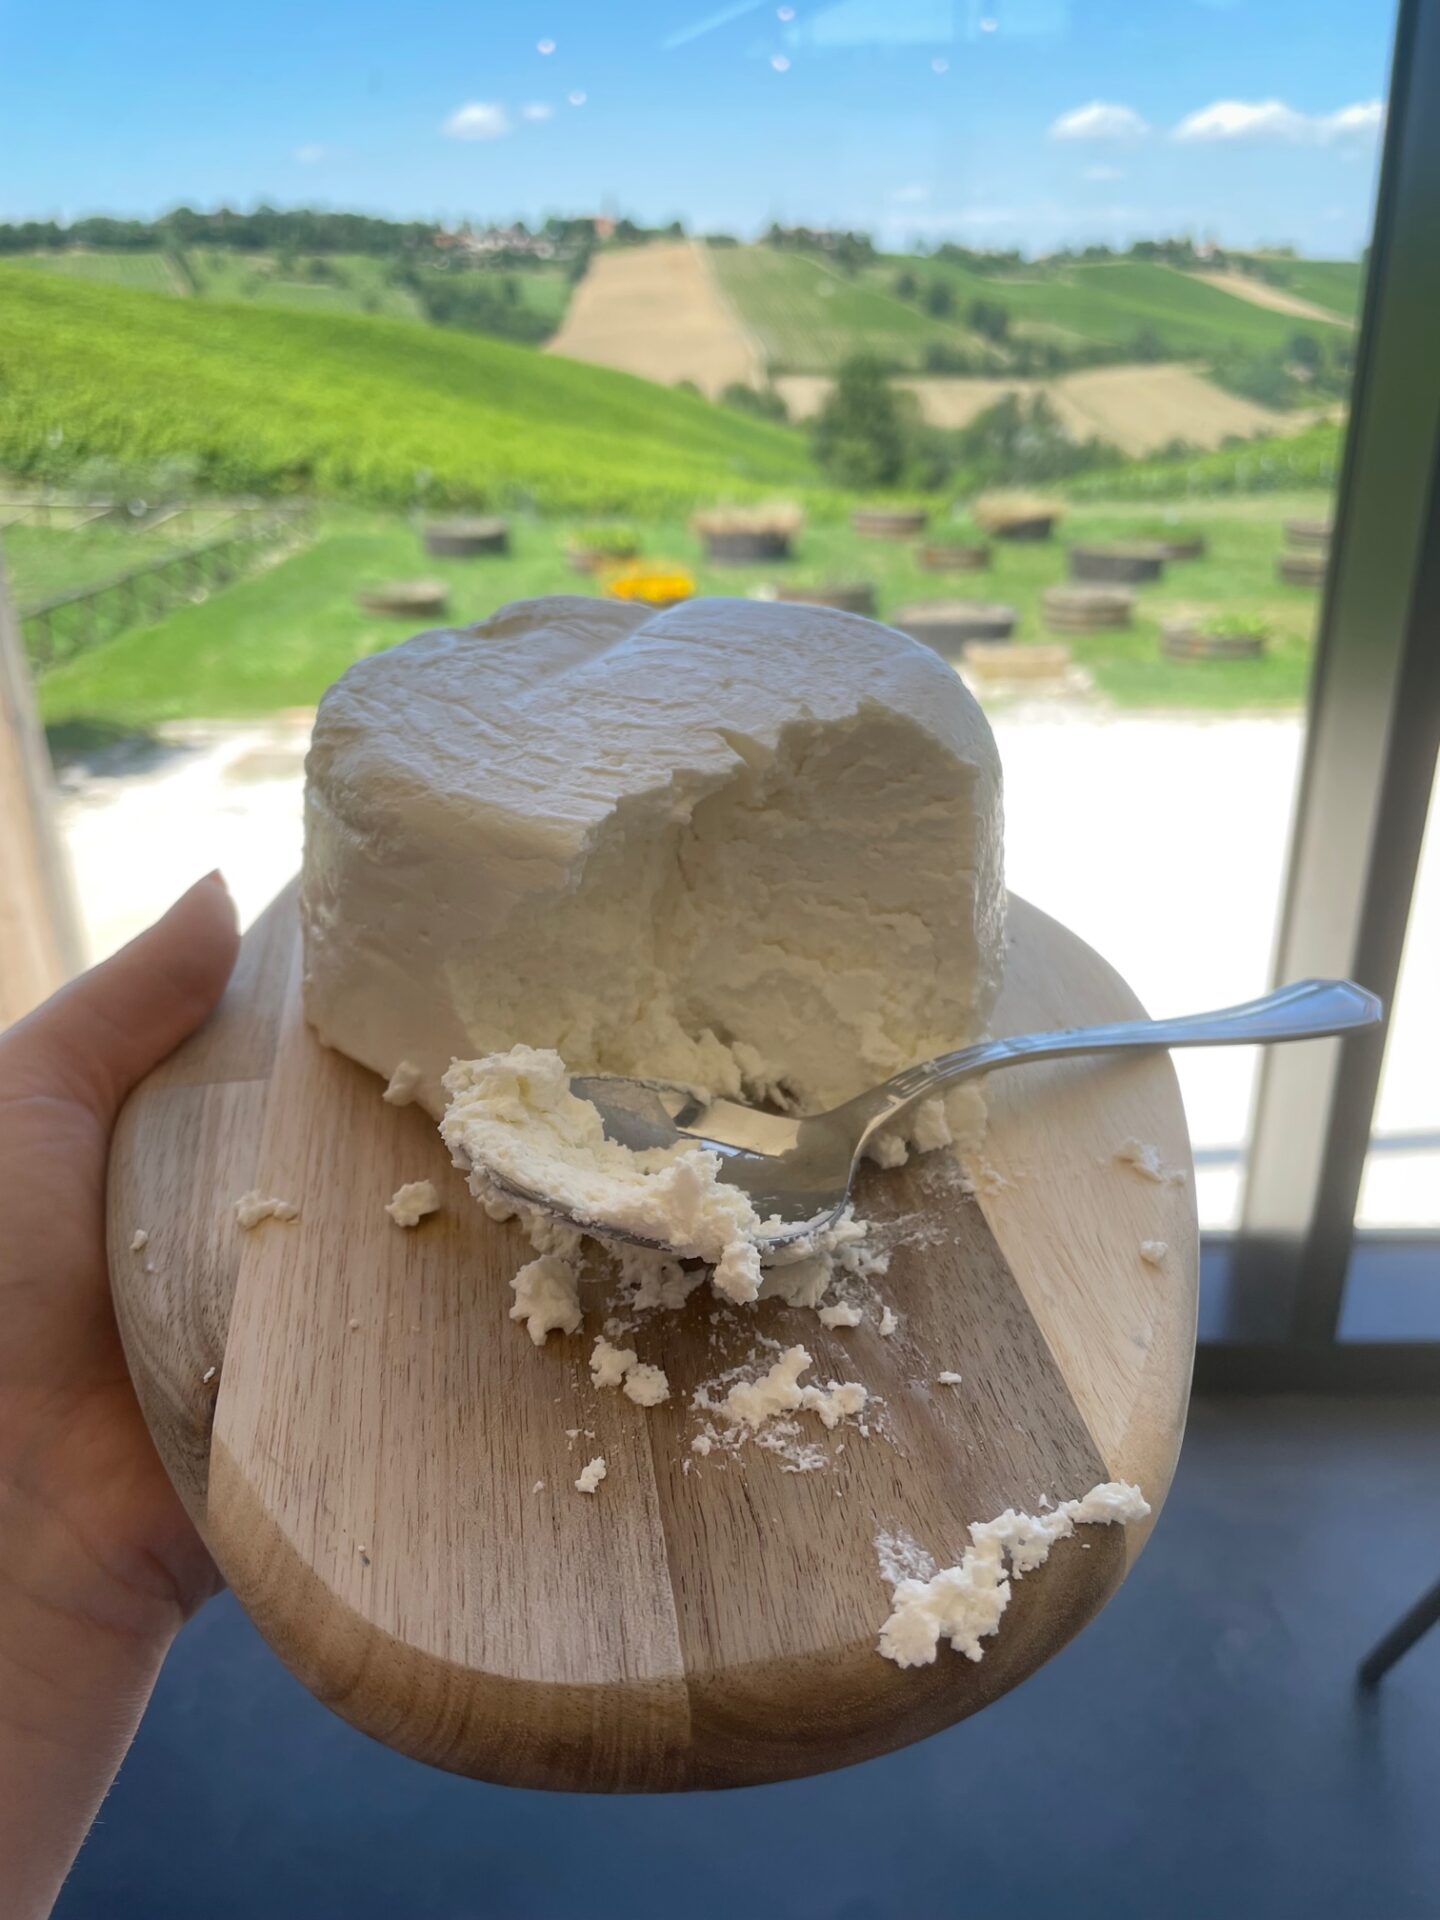 Verse ricotta in Bologna - Eet tips in Bologna - Foodblog Foodinista